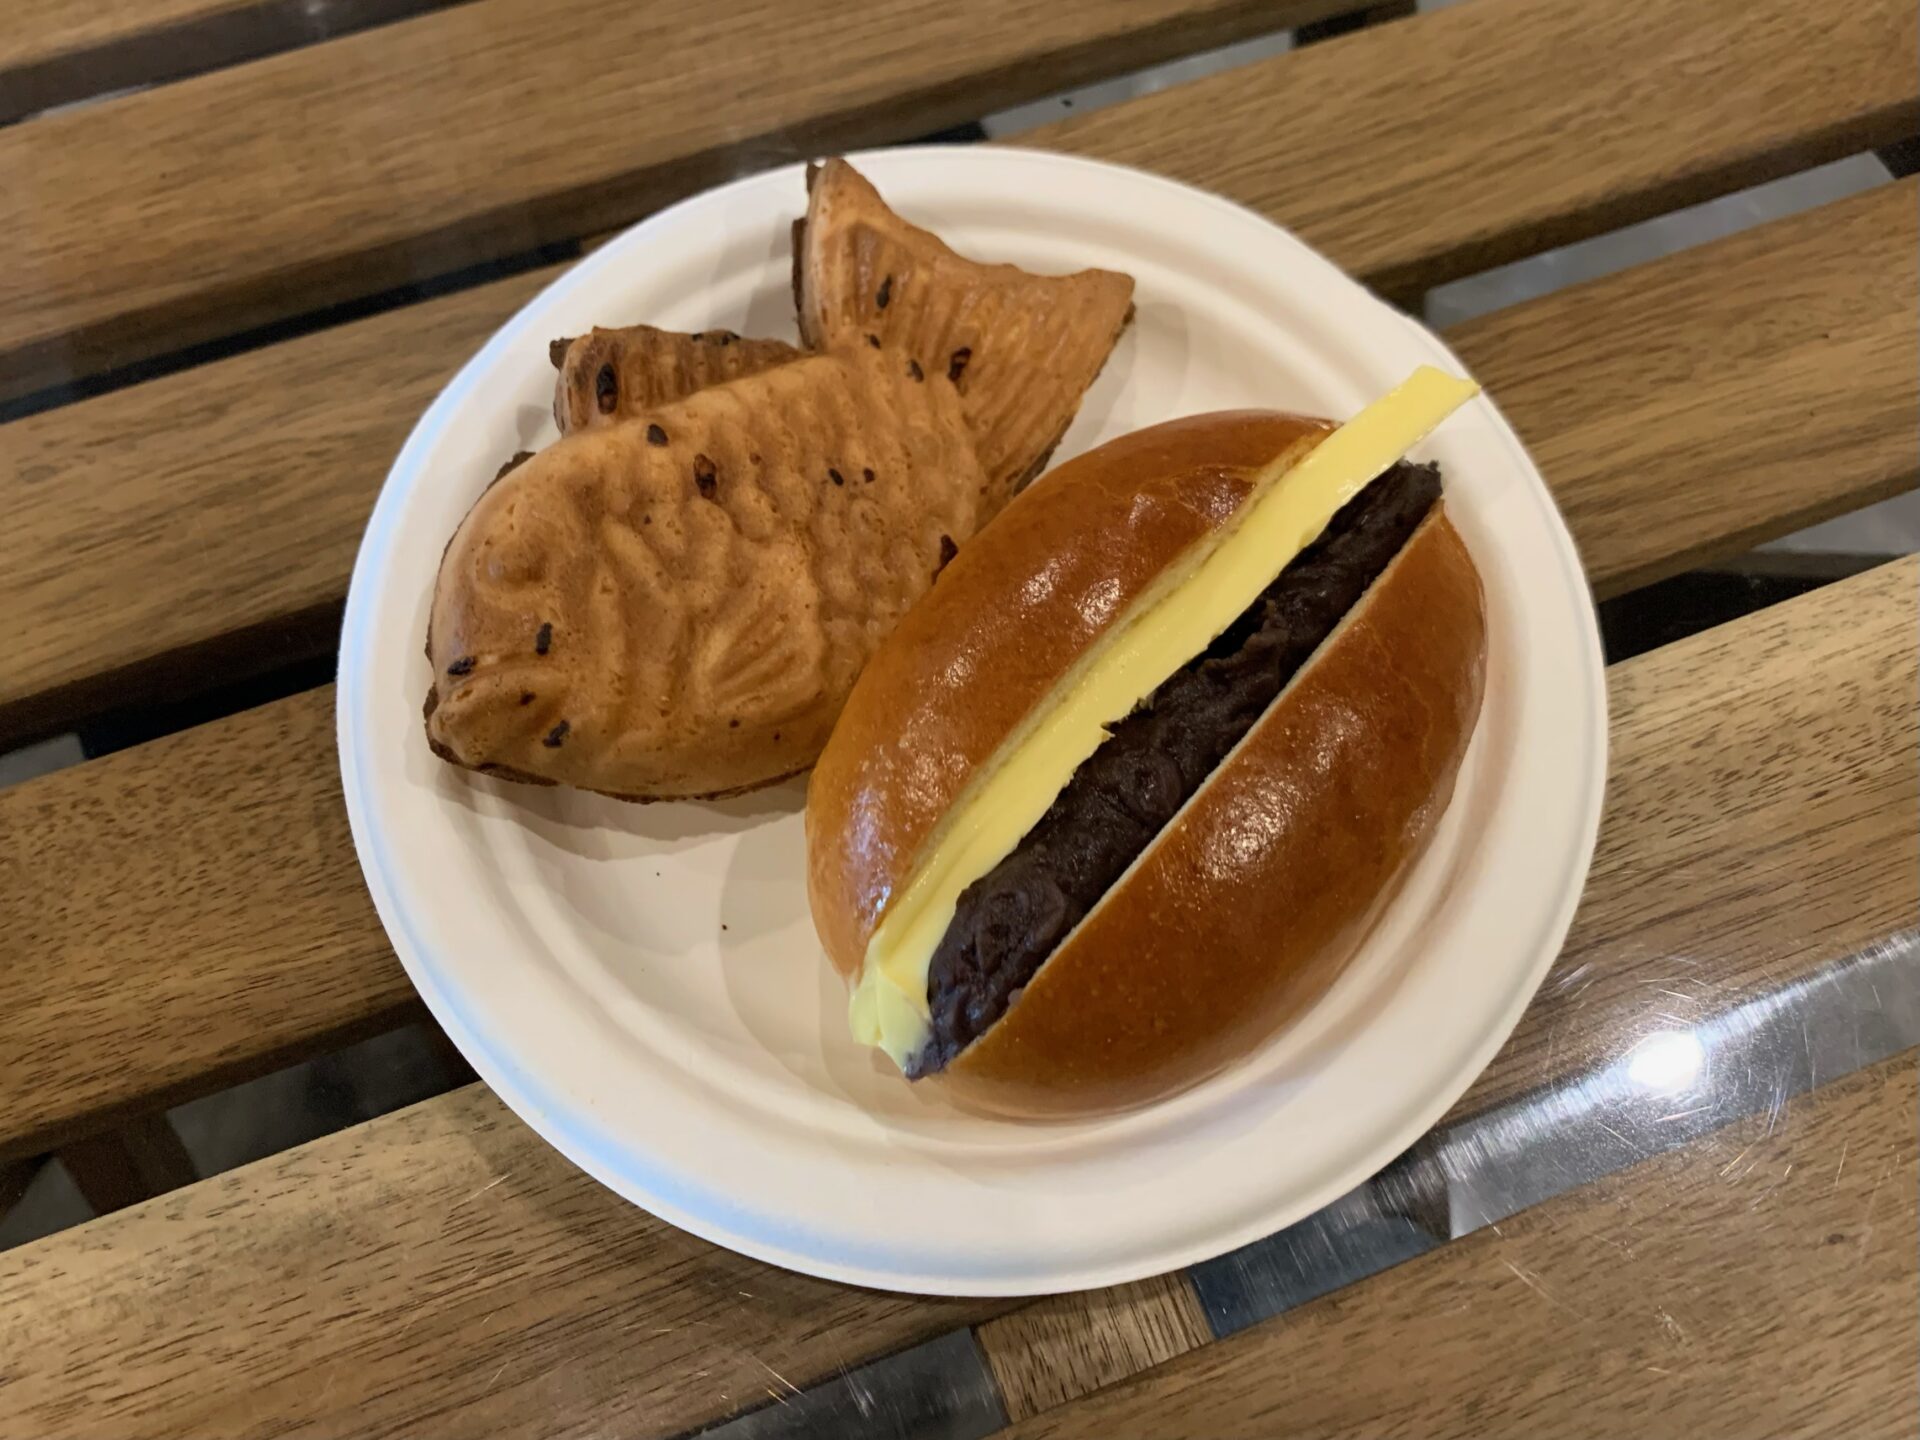 Old Hands Cafeteria - Cream cheese taiyaki and Anko butter bun